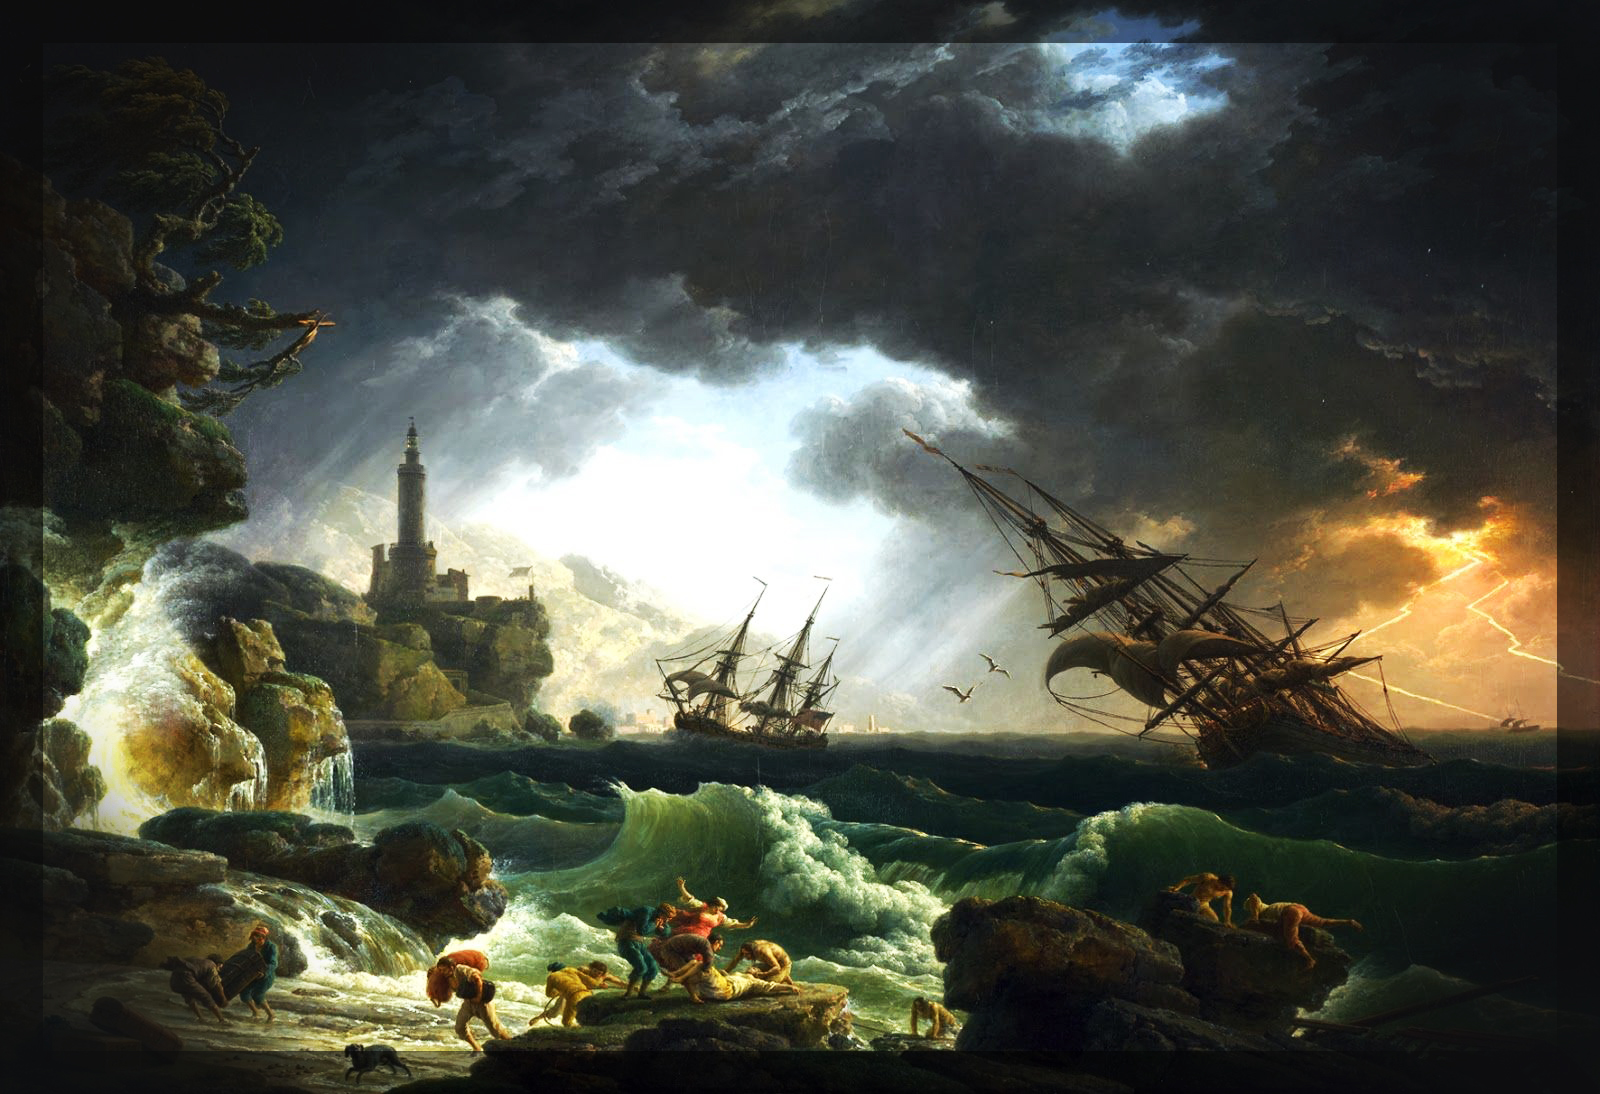 Painting of ships caught in a storm